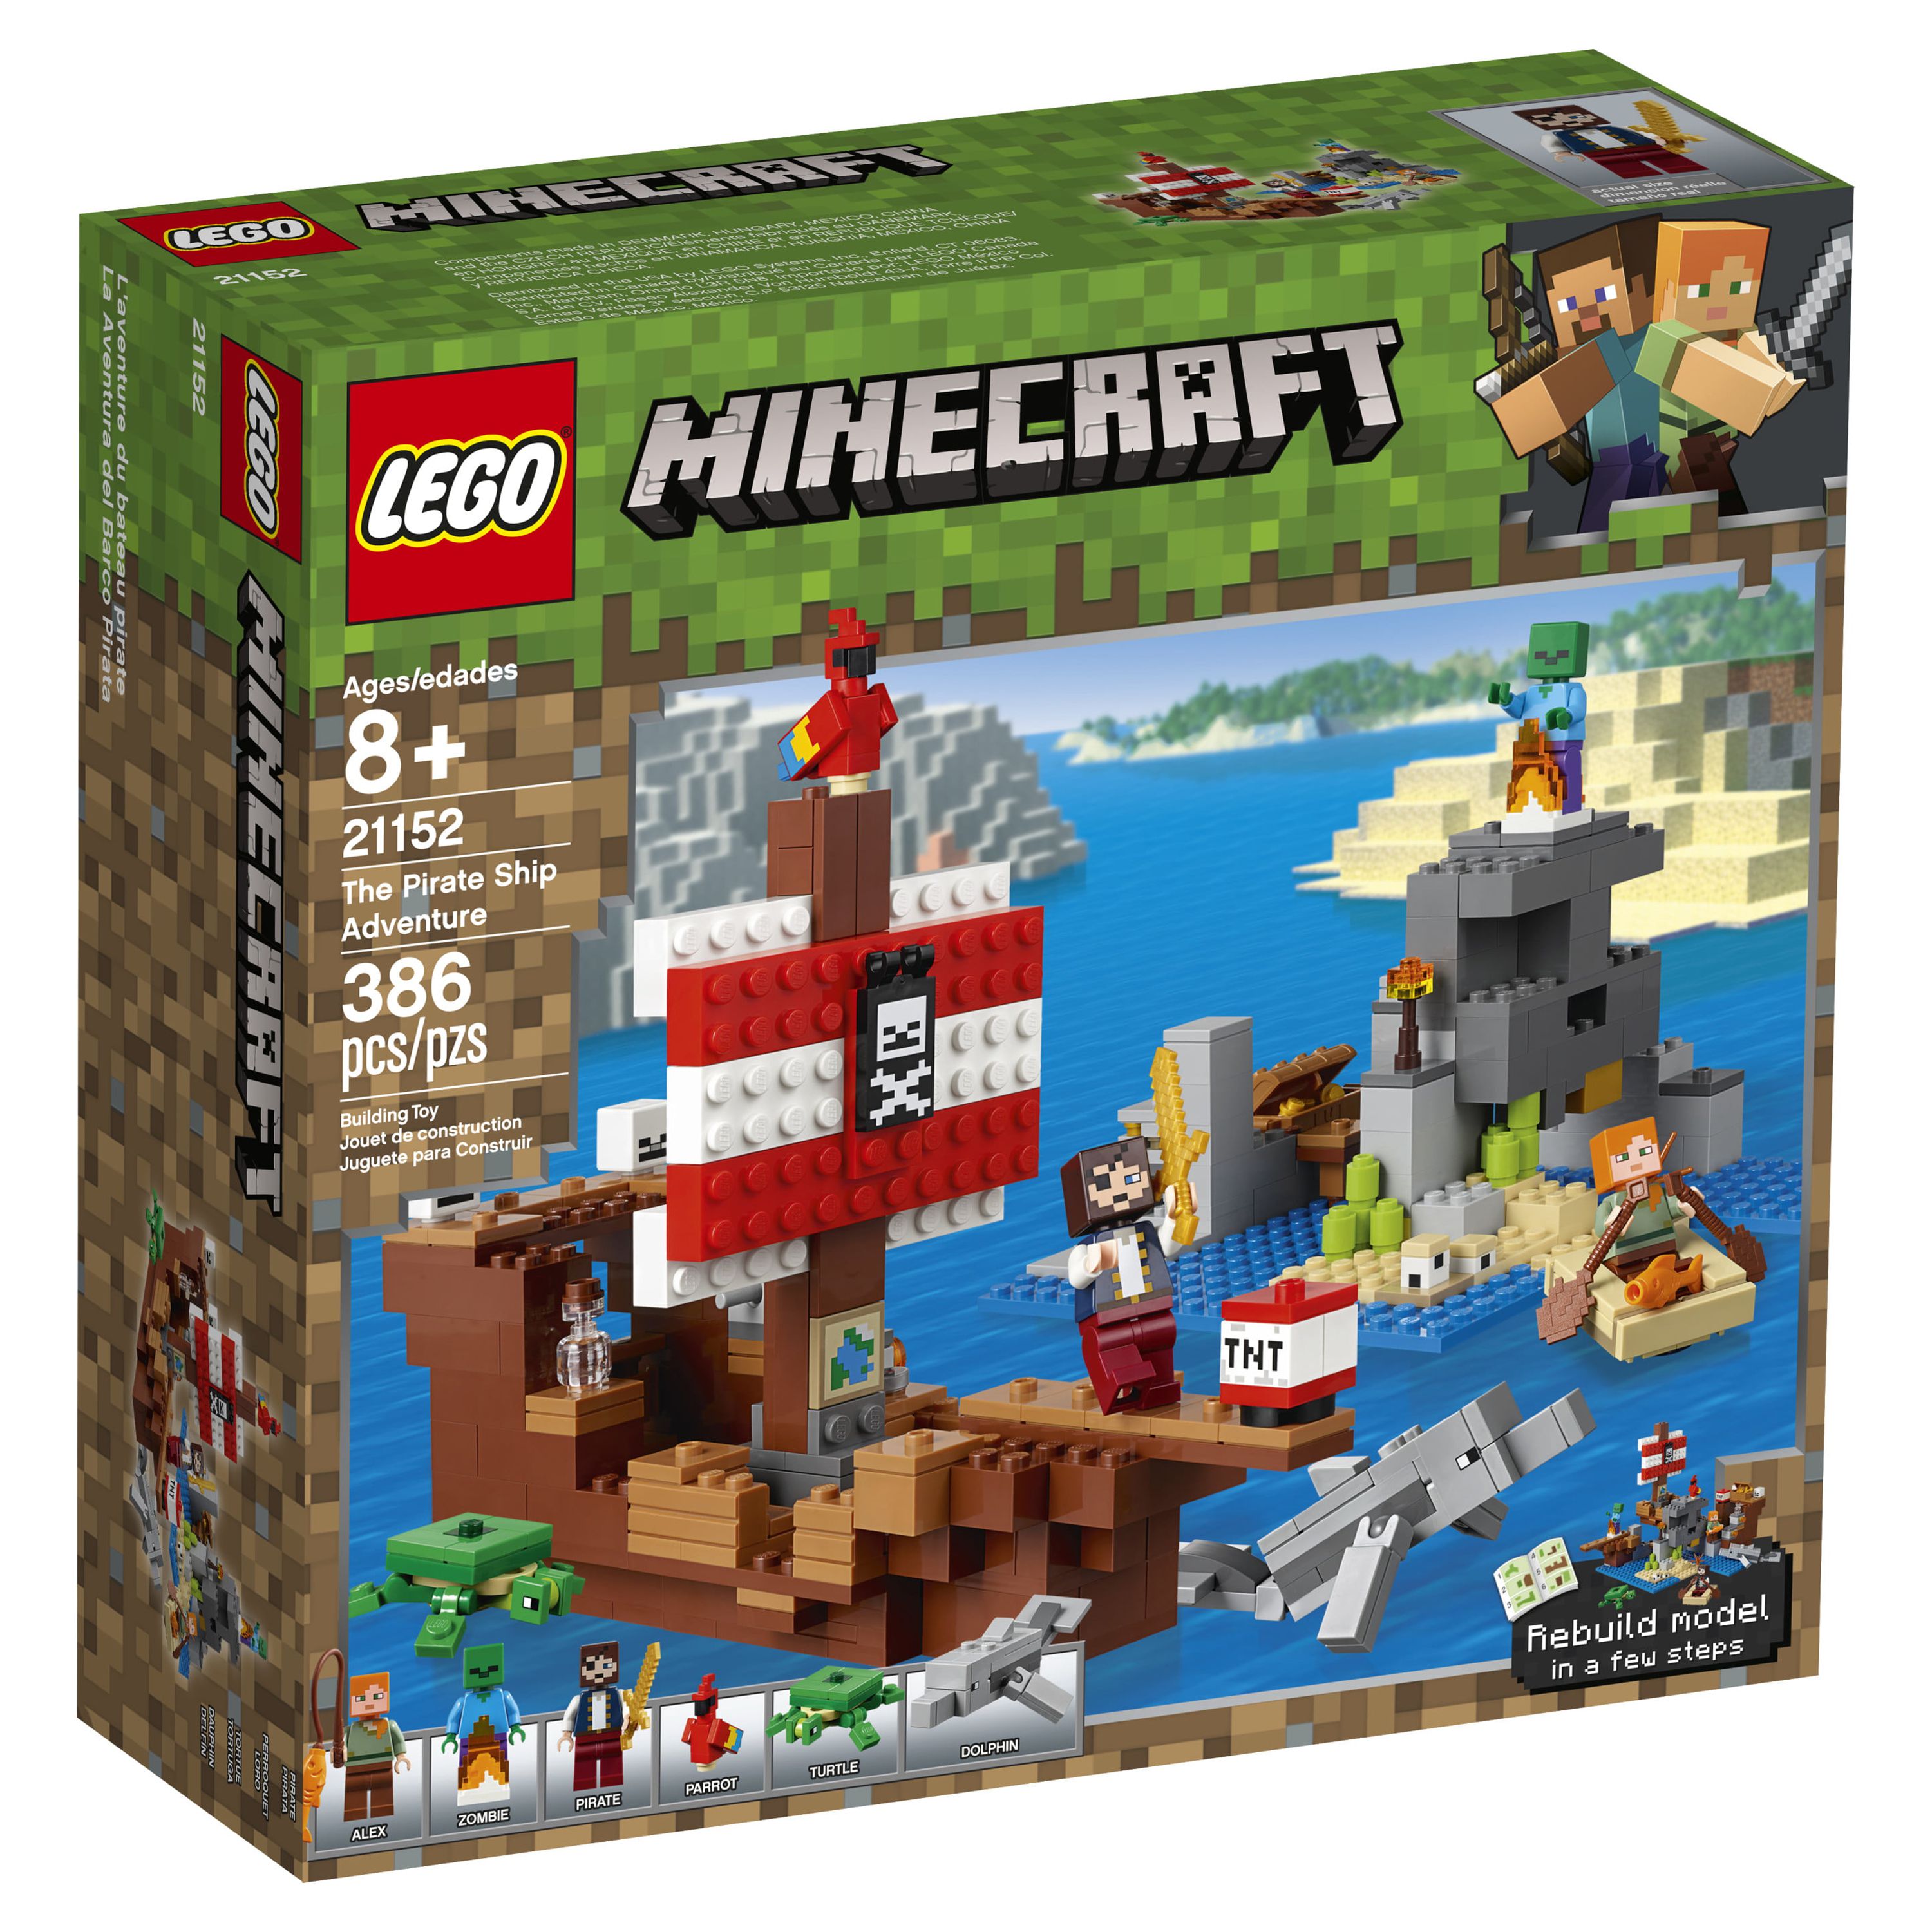 LEGO Minecraft The Pirate Ship Adventure 21152 Pirate Ship Boat Shark Treasure Chest Building Toy Kit (386 Pieces) - image 5 of 6